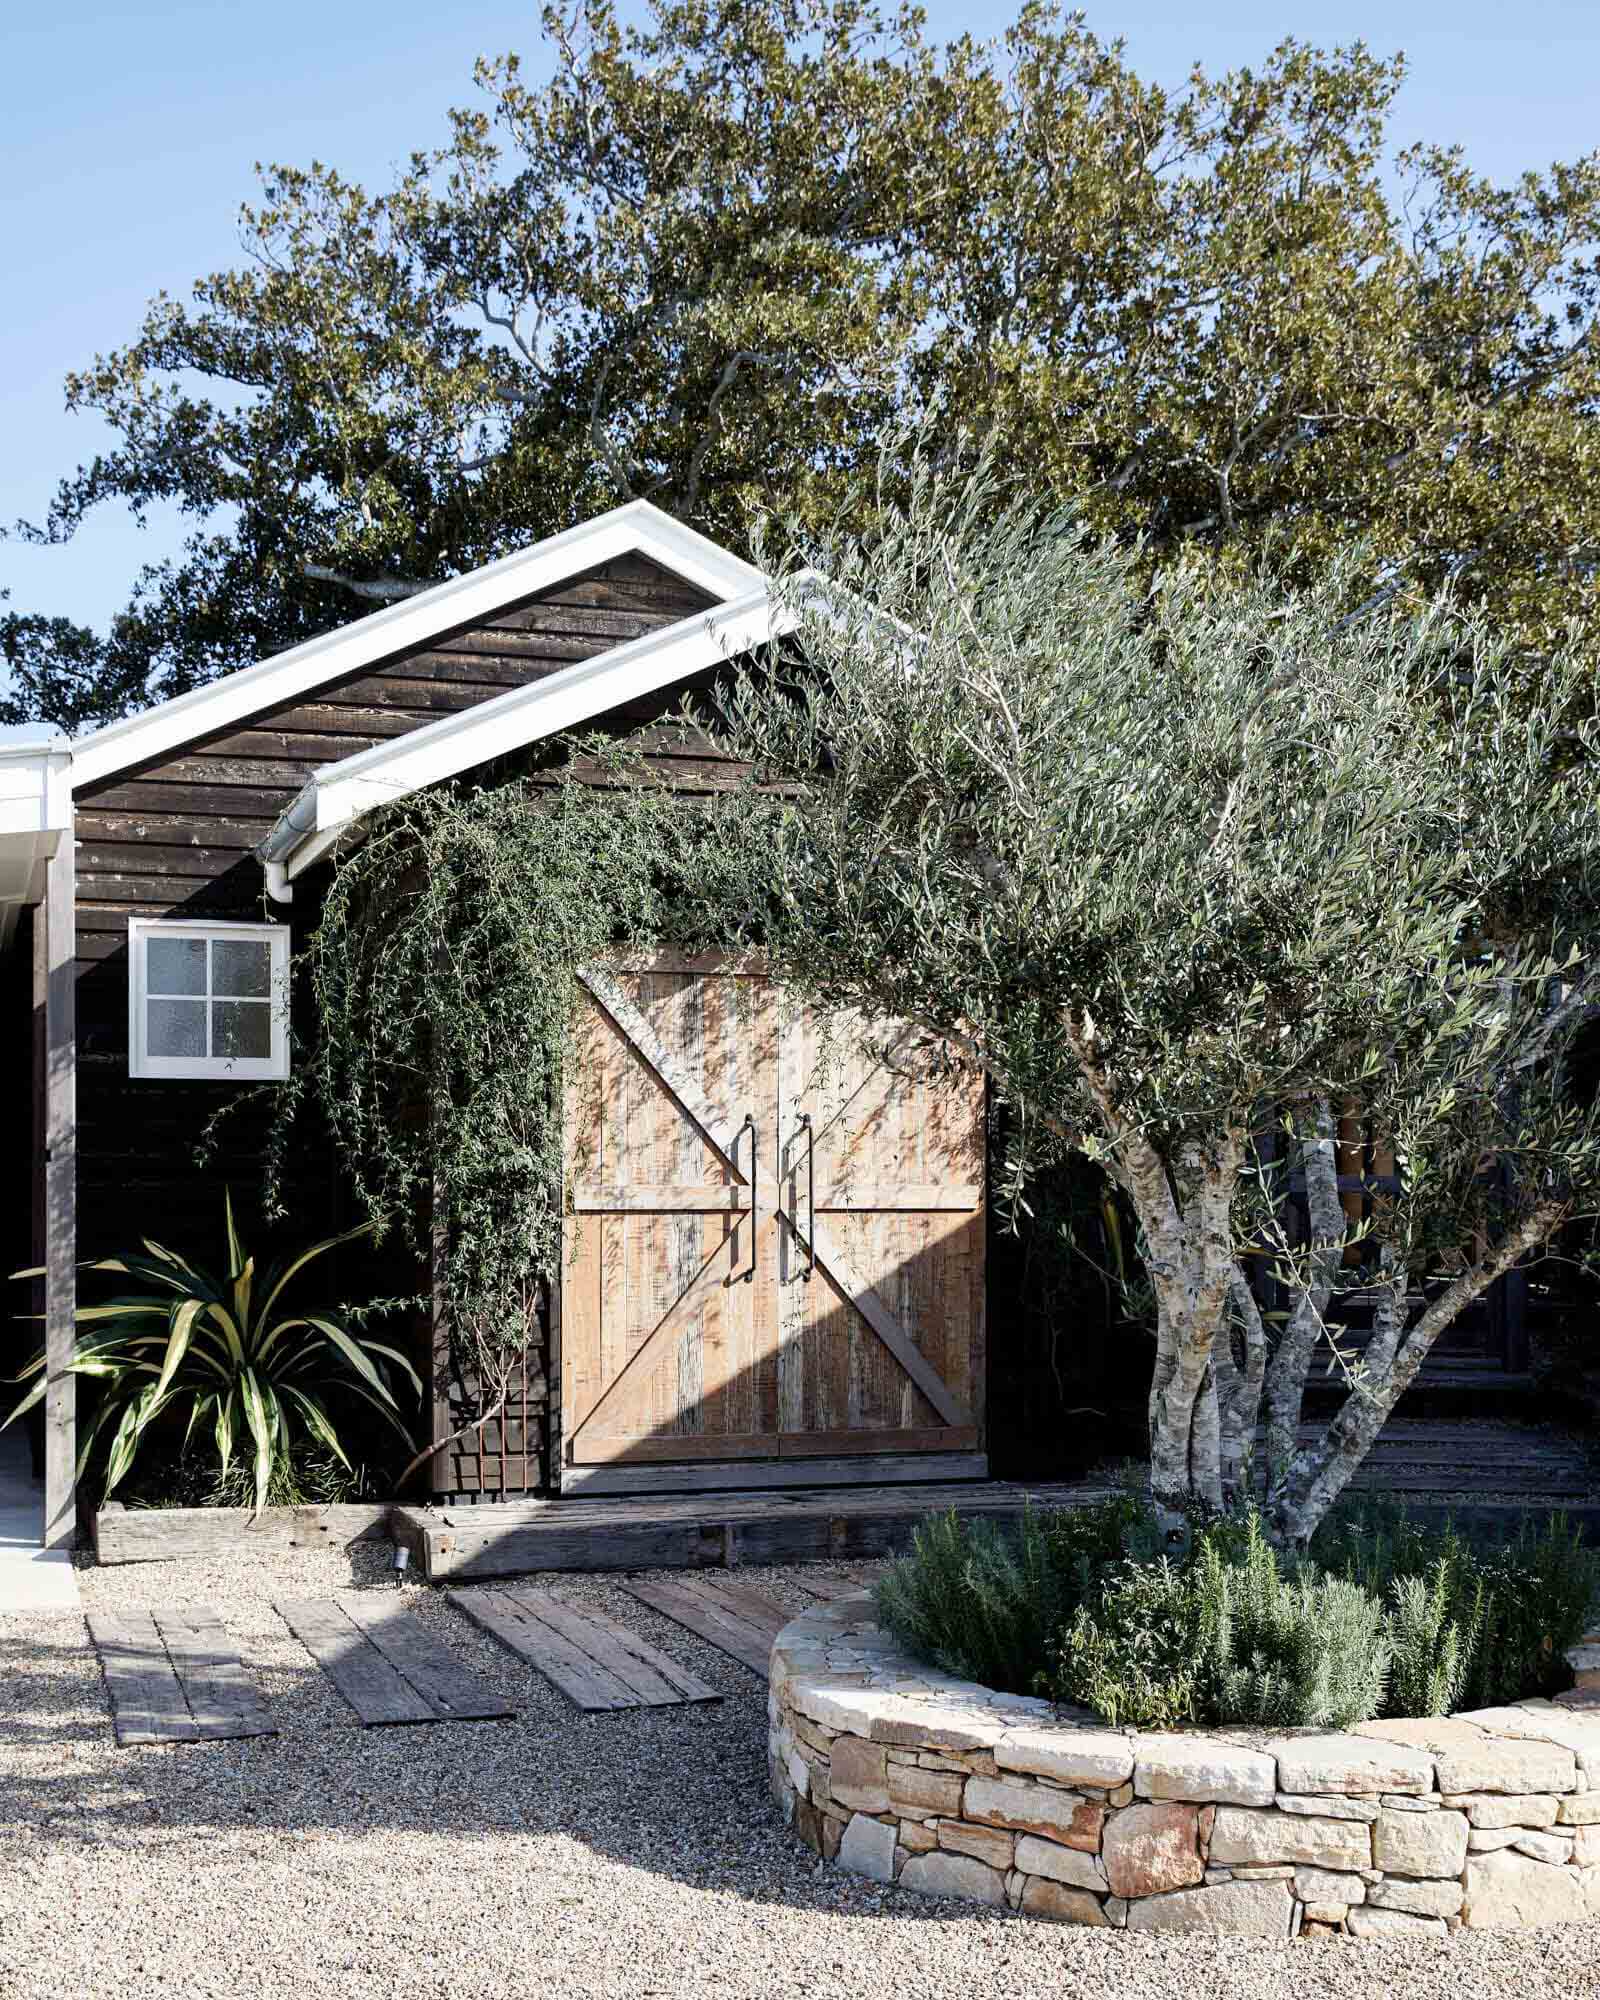 Exterior of the Le Viti Barn Newrybar accommodation with black weatherboards, rustic timber barn doors and established olive tree